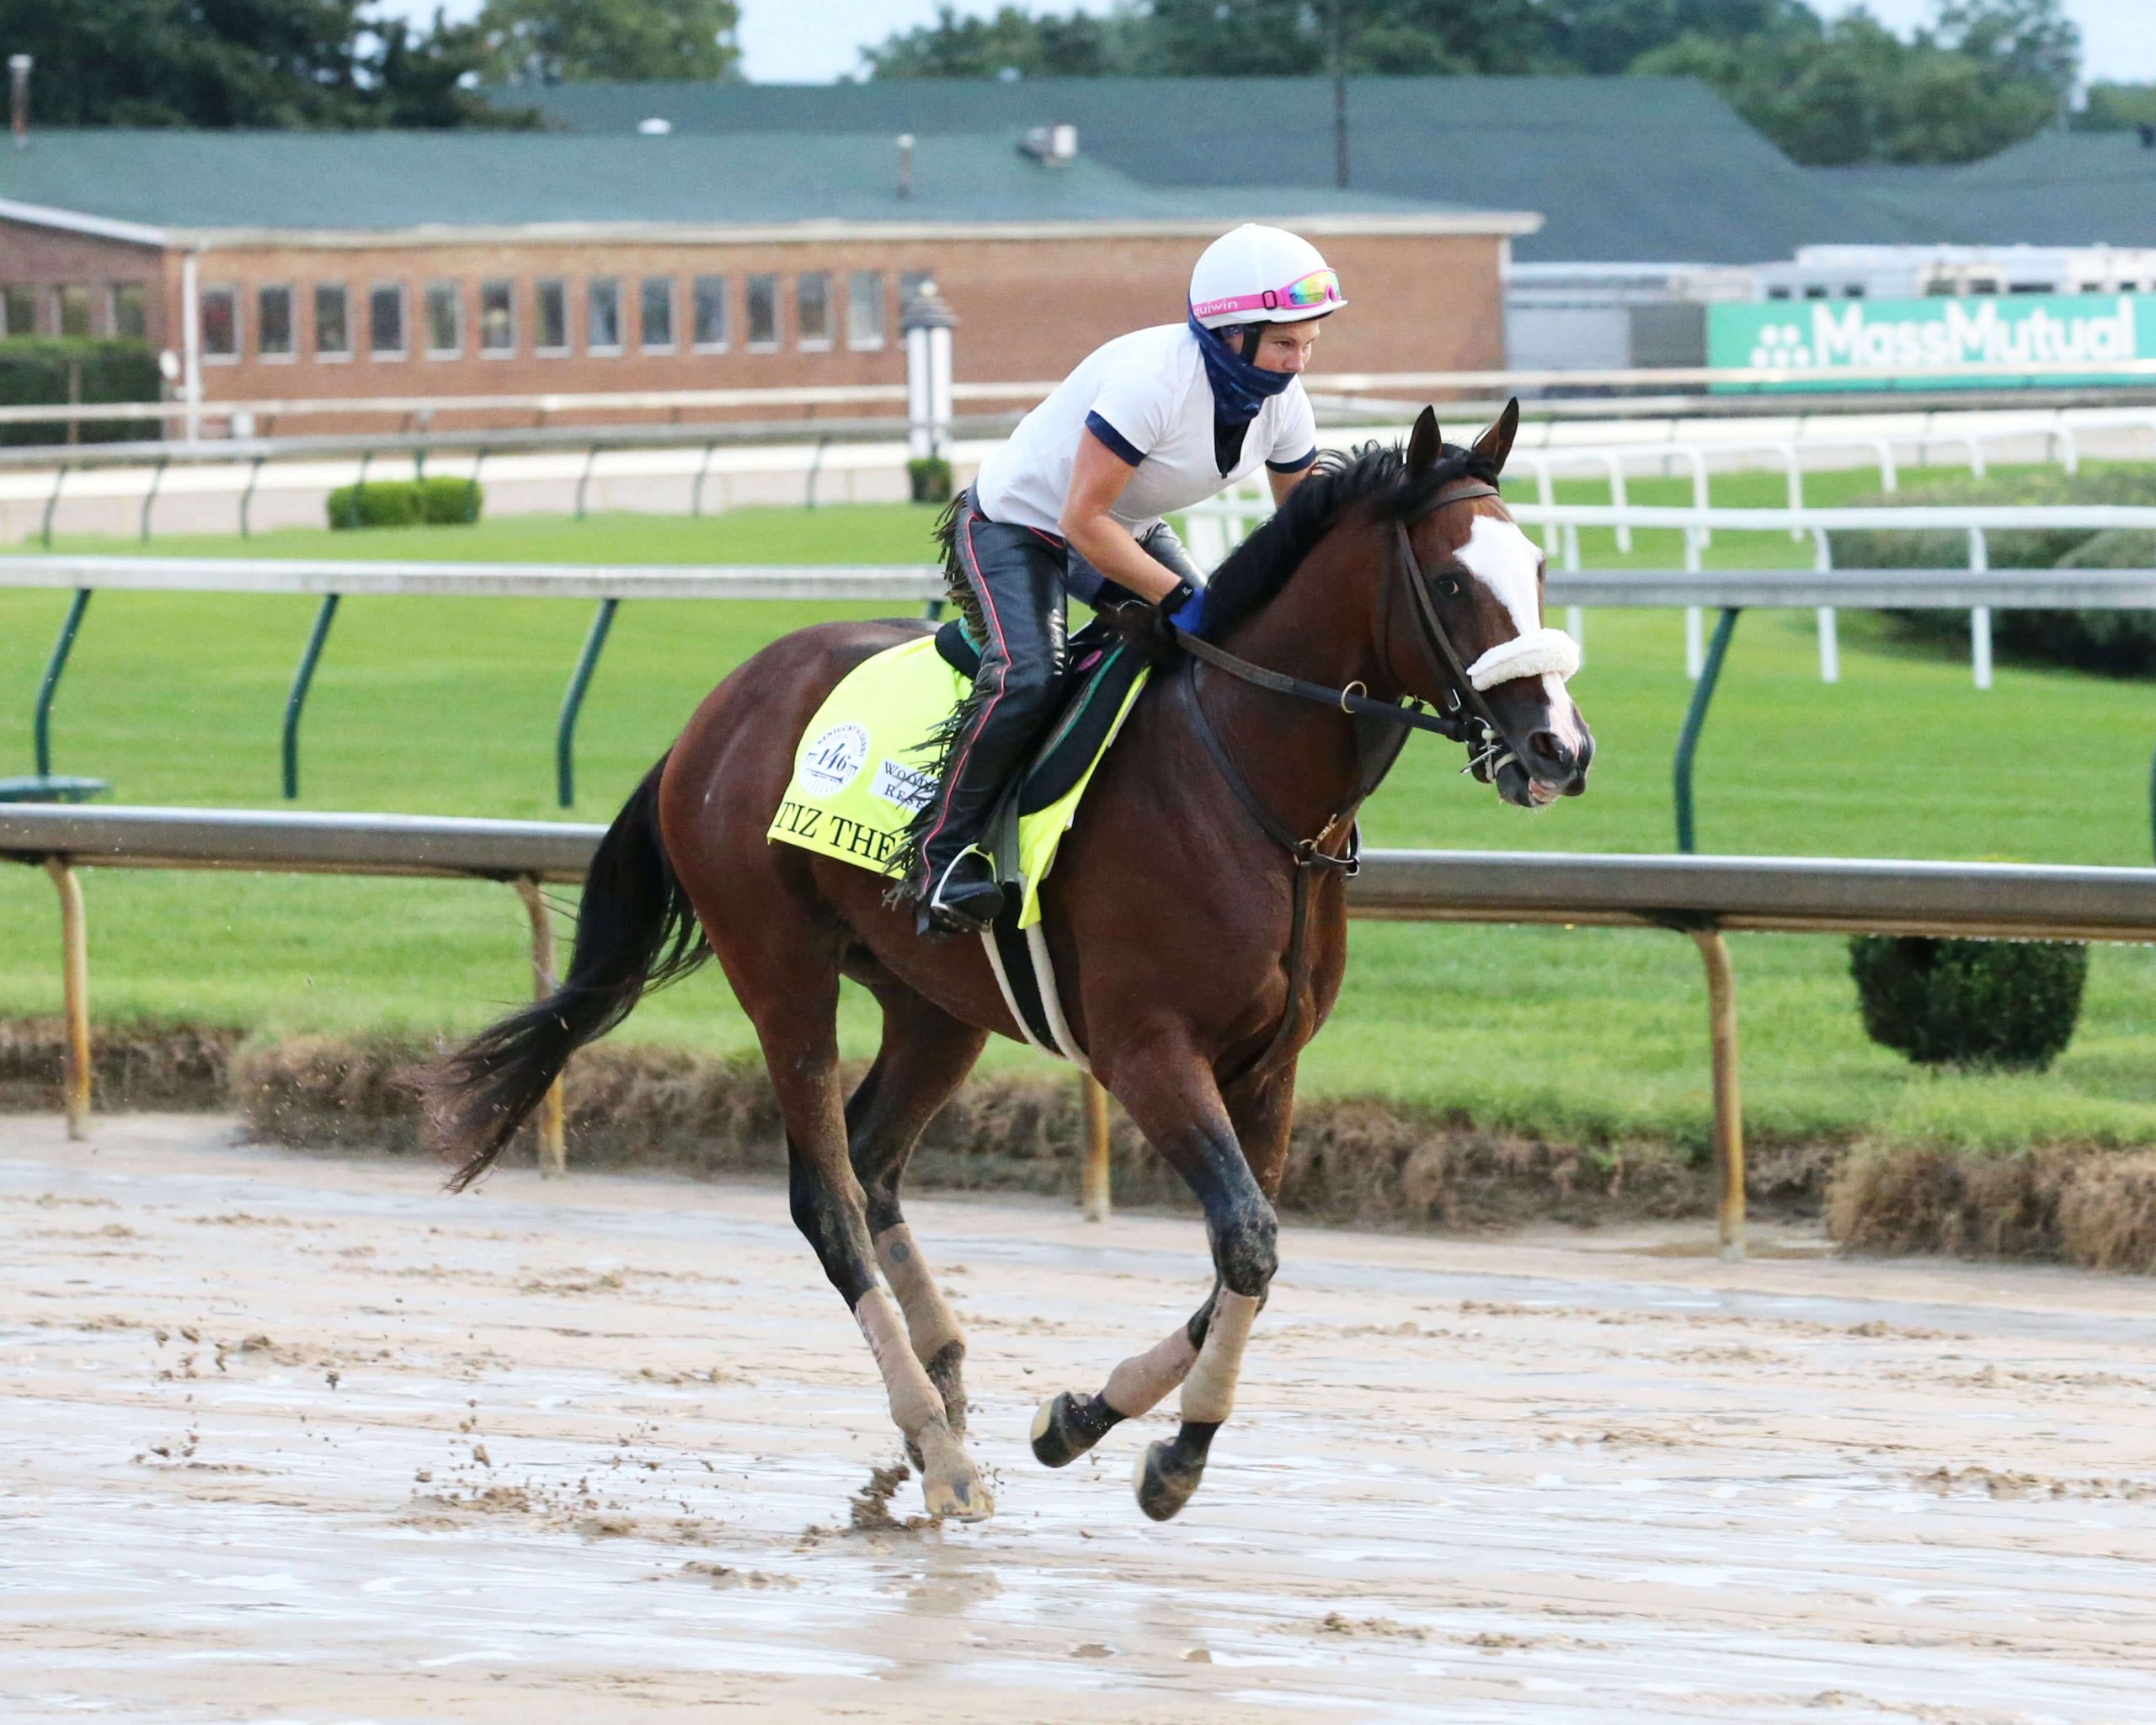 tiz-the-law-skipping-preakness-breeders-cup-classic-up-next-for